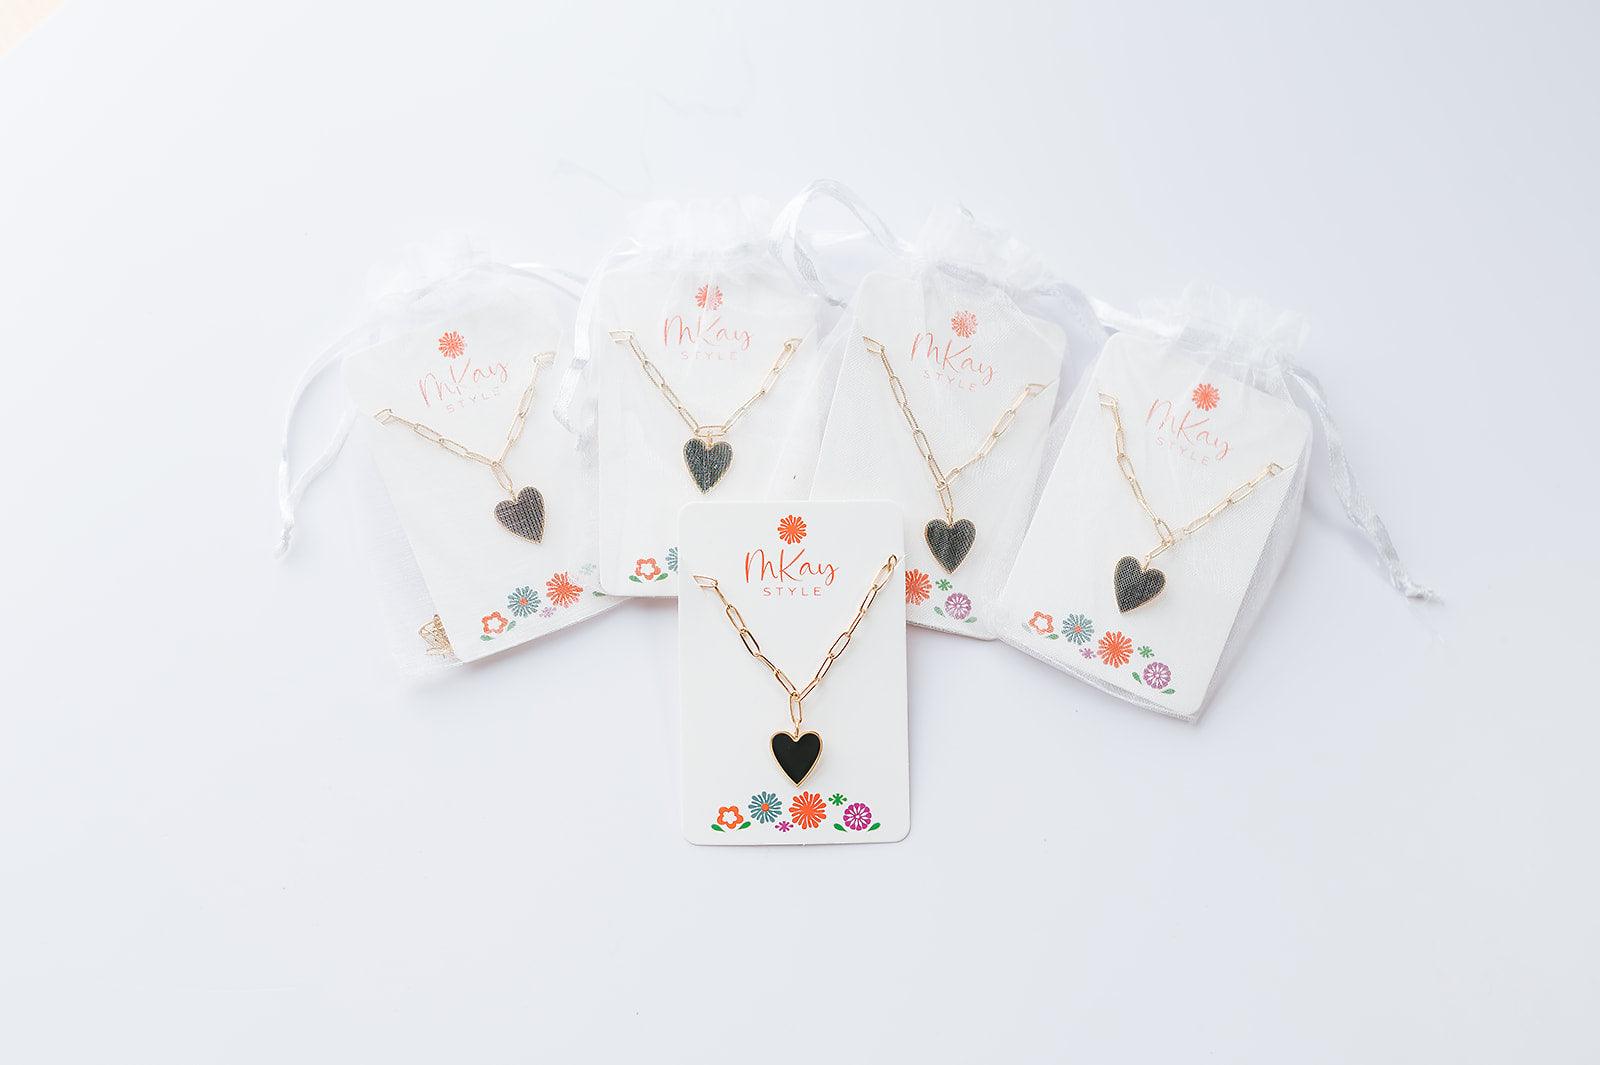 Black Heart Necklace Party Pack Party Favor - Mkay Style